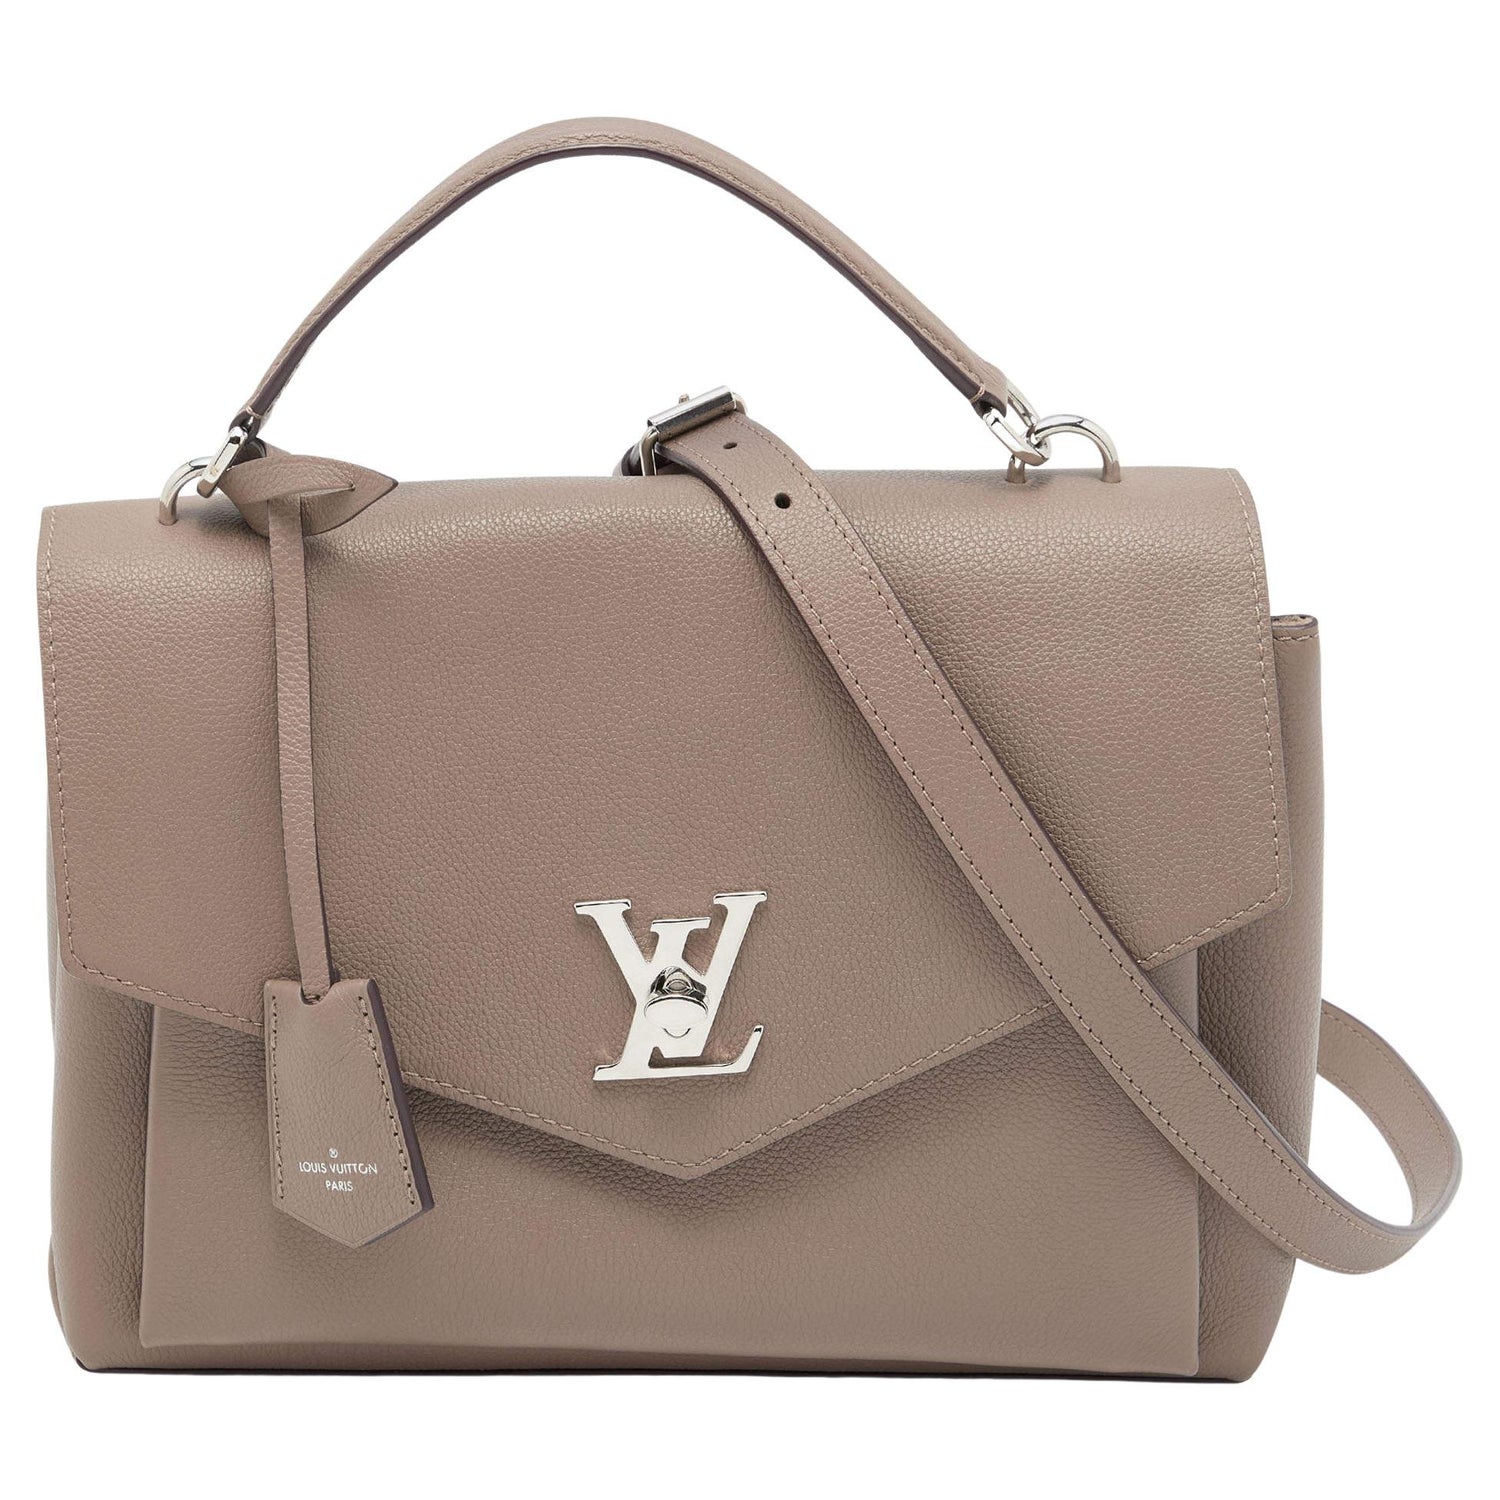 Sold at Auction: Louis Vuitton Black MyLockMe Satchel with Silver